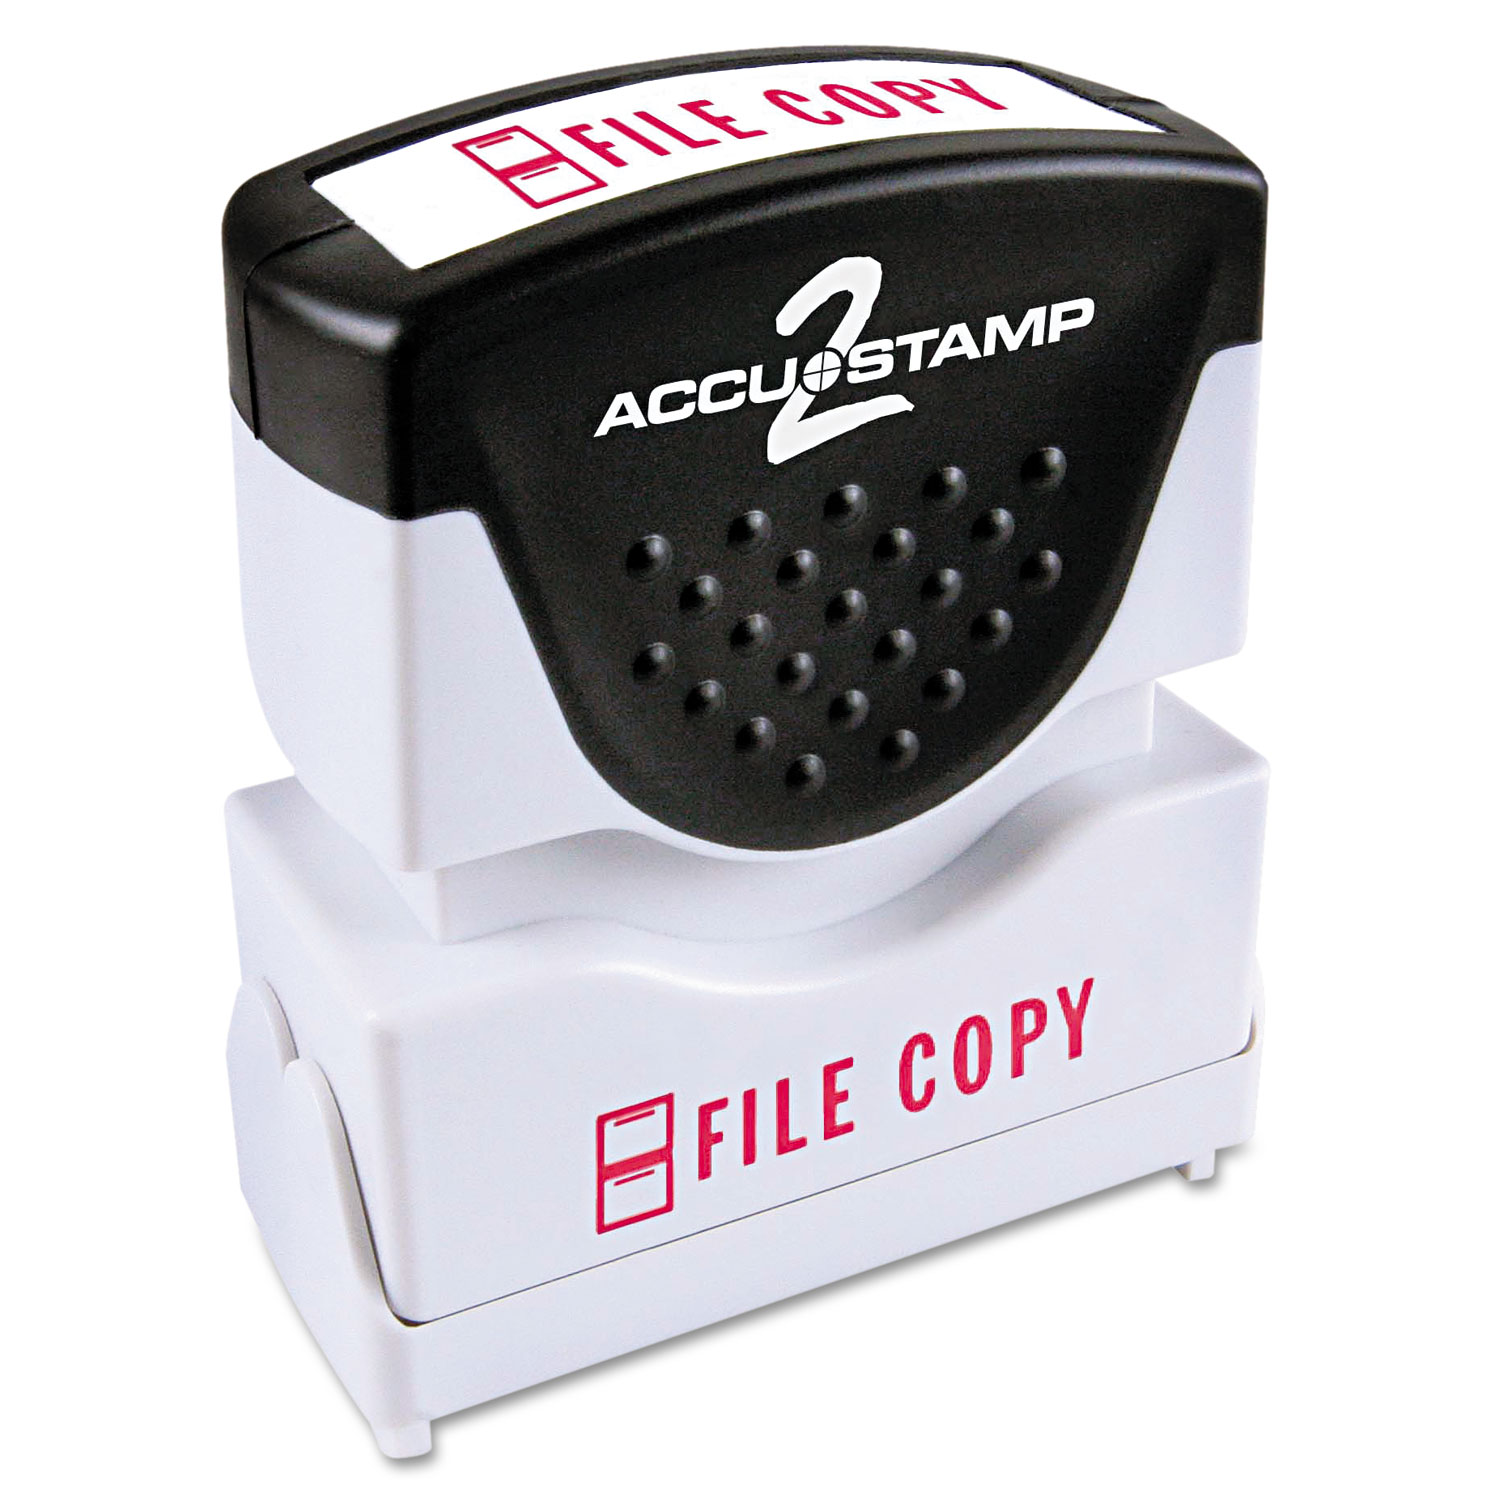  ACCUSTAMP2 035596 Pre-Inked Shutter Stamp, Red, FILE COPY, 1 5/8 x 1/2 (COS035596) 